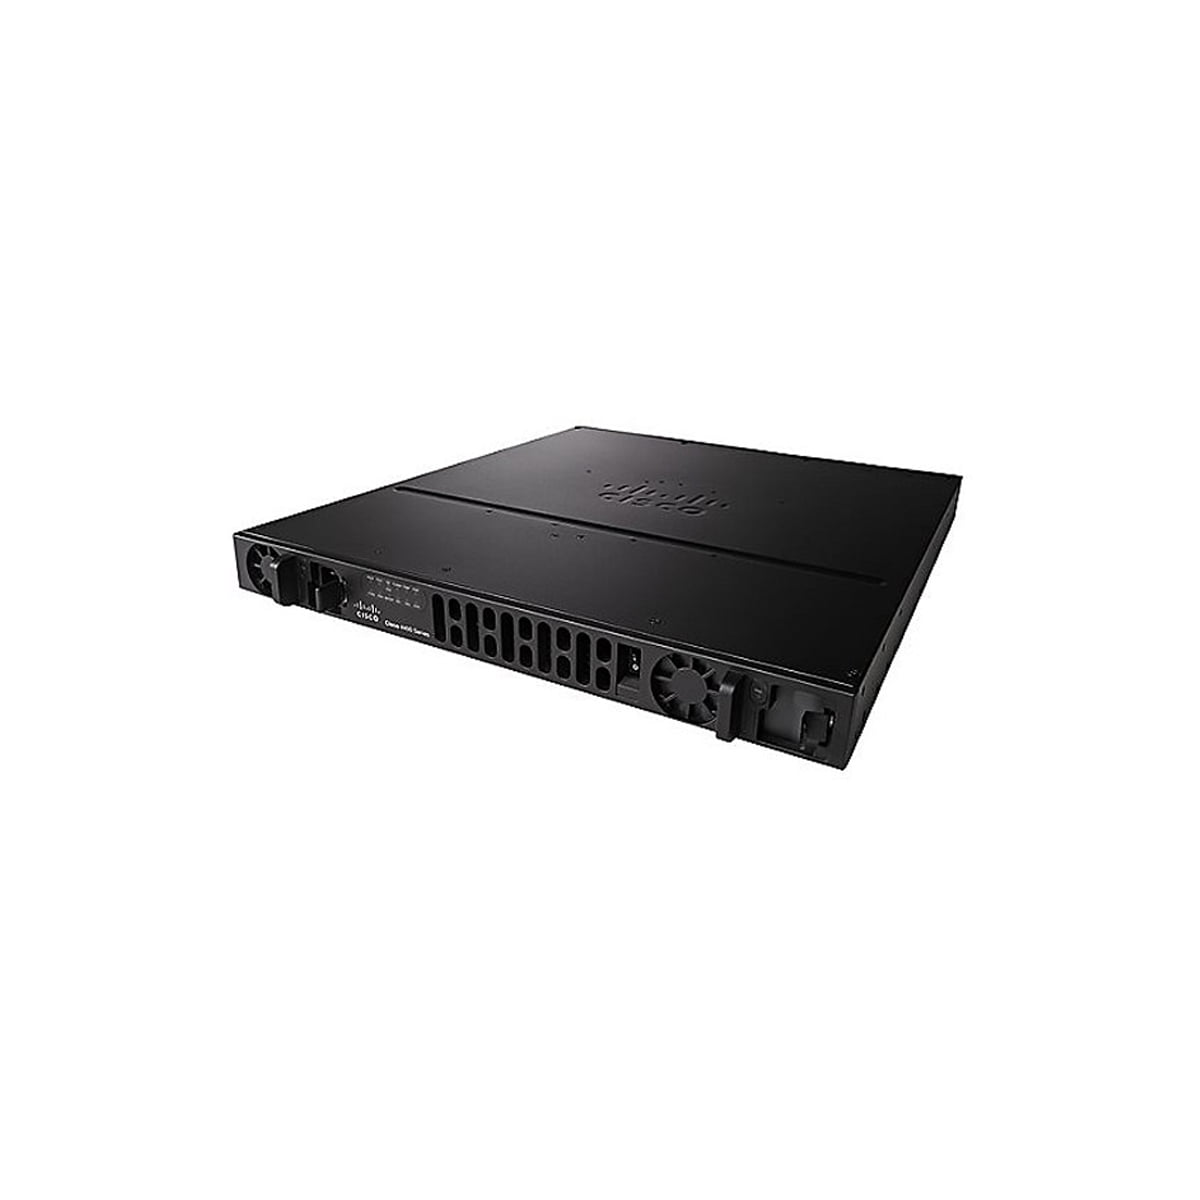 Cisco ISR4331/K9 Integrated Services Router GigE rackmountable